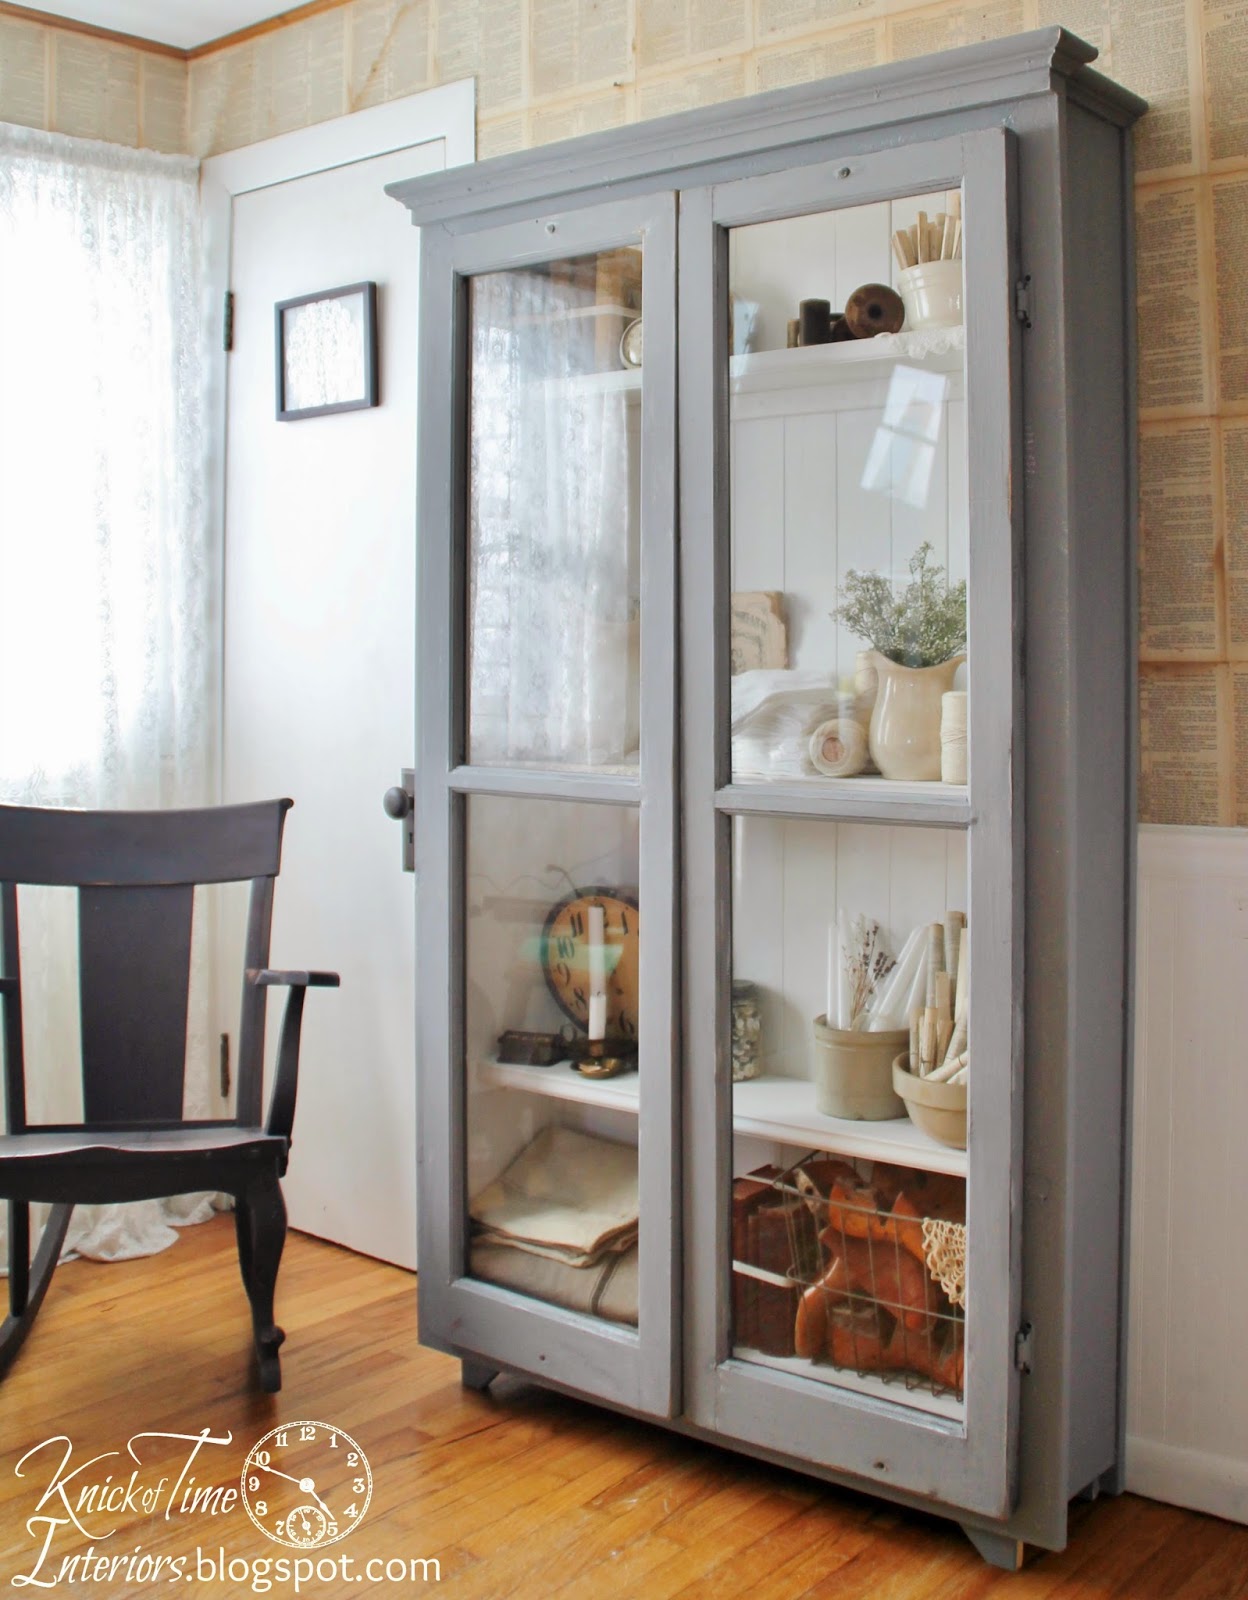 ways to repurpose old windows - use as doors on antique style cupboard, via Knick Of Time Interiors